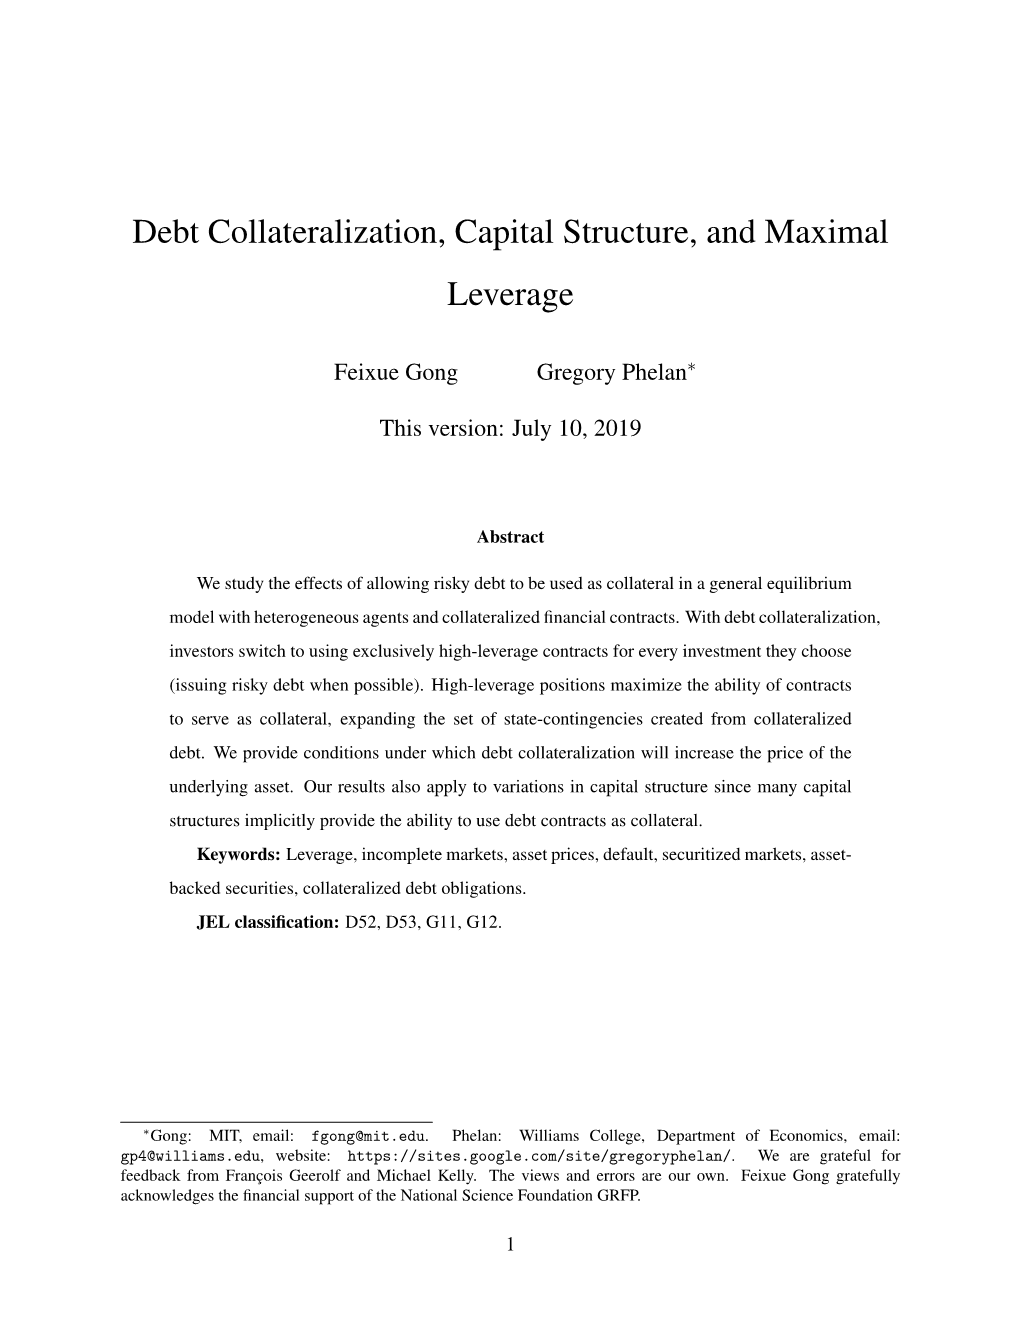 Debt Collateralization, Capital Structure, and Maximal Leverage